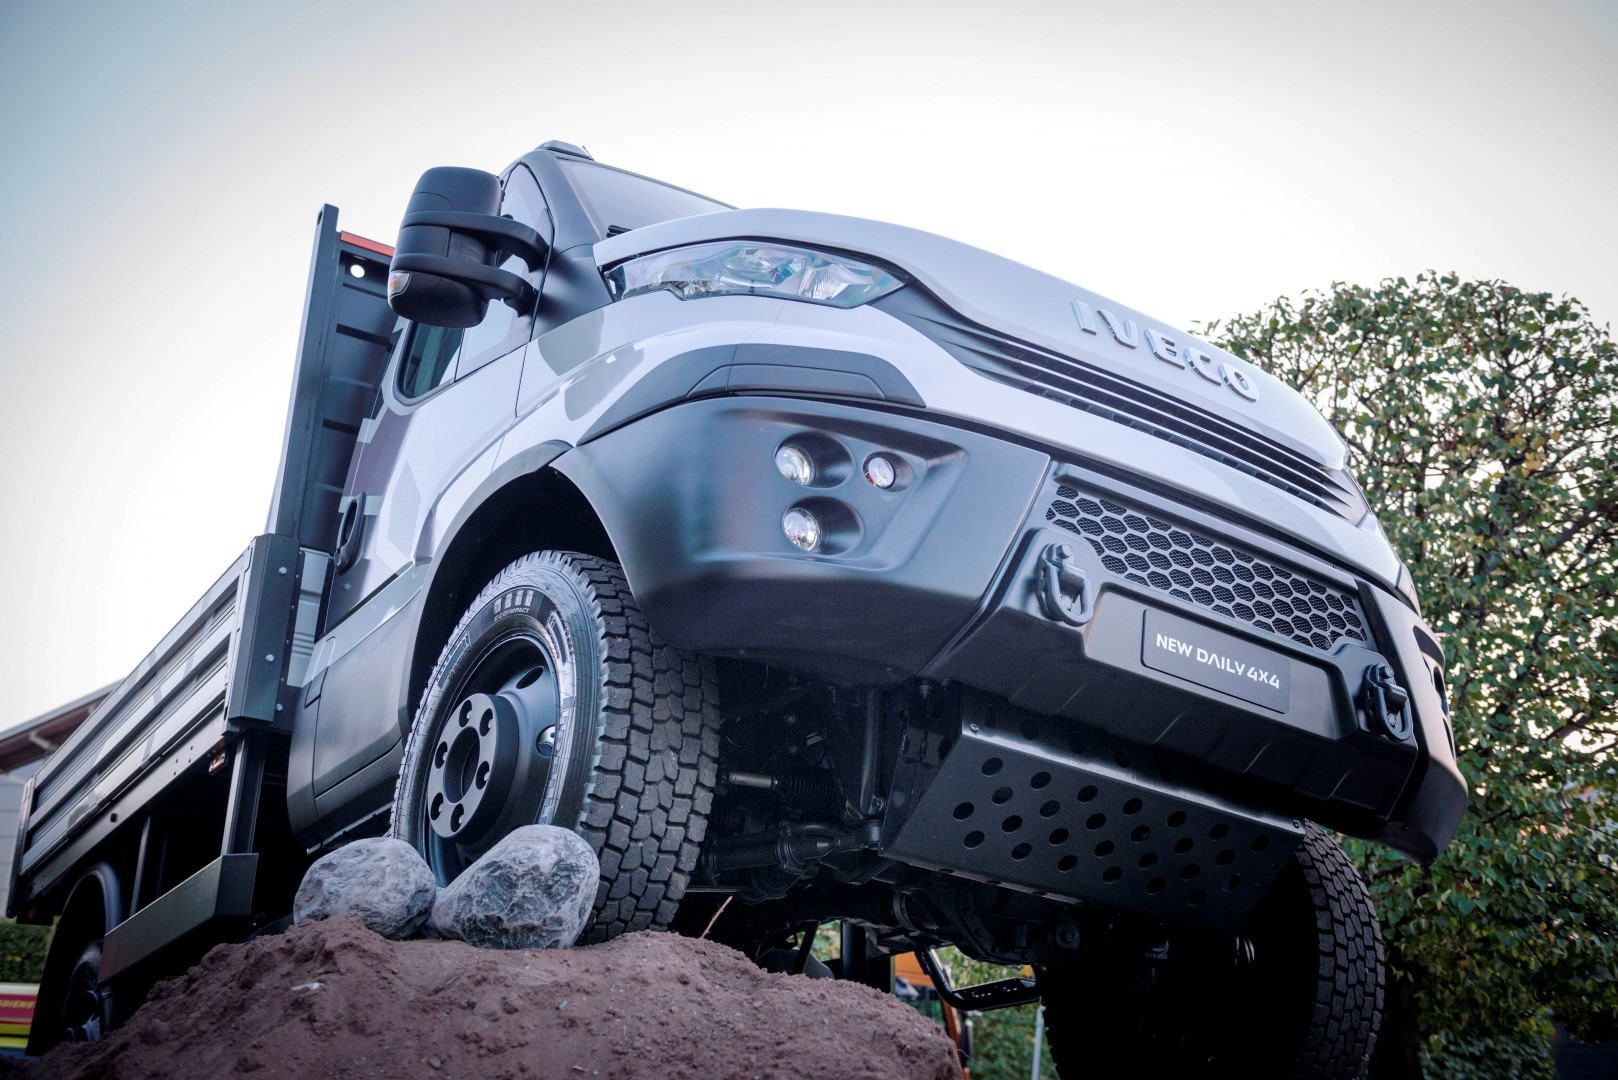 Iveco Launches New Daily 4×4